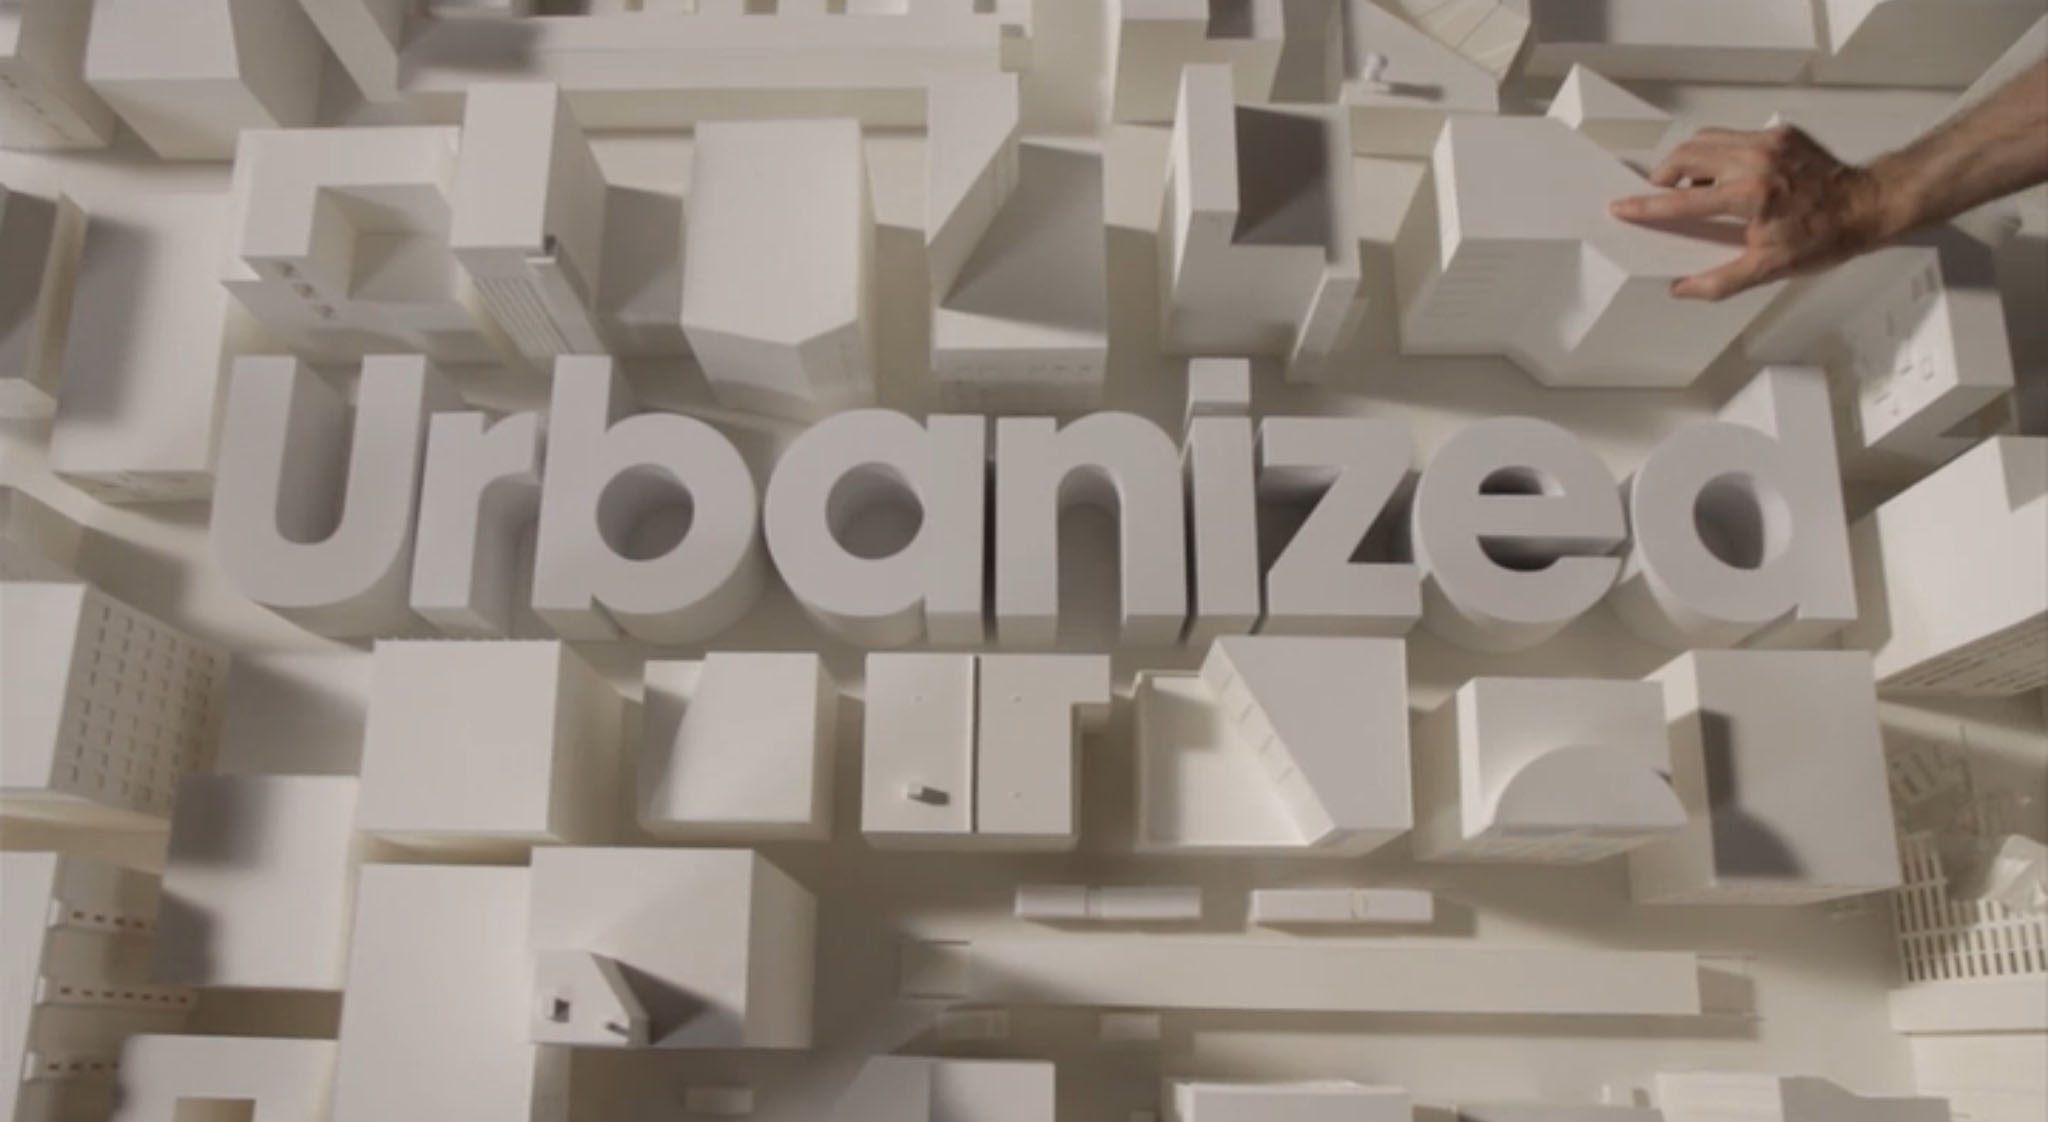 Screen capture from opening title sequence of the documentary film Urbanized. Image is a overhead shot of model buildings tightly arranged as in a city block. In the center, also as models, letters spelling 'Urbanized' have been placed. In the top right corner a human hand is placing a model building to complete the arrangement. 